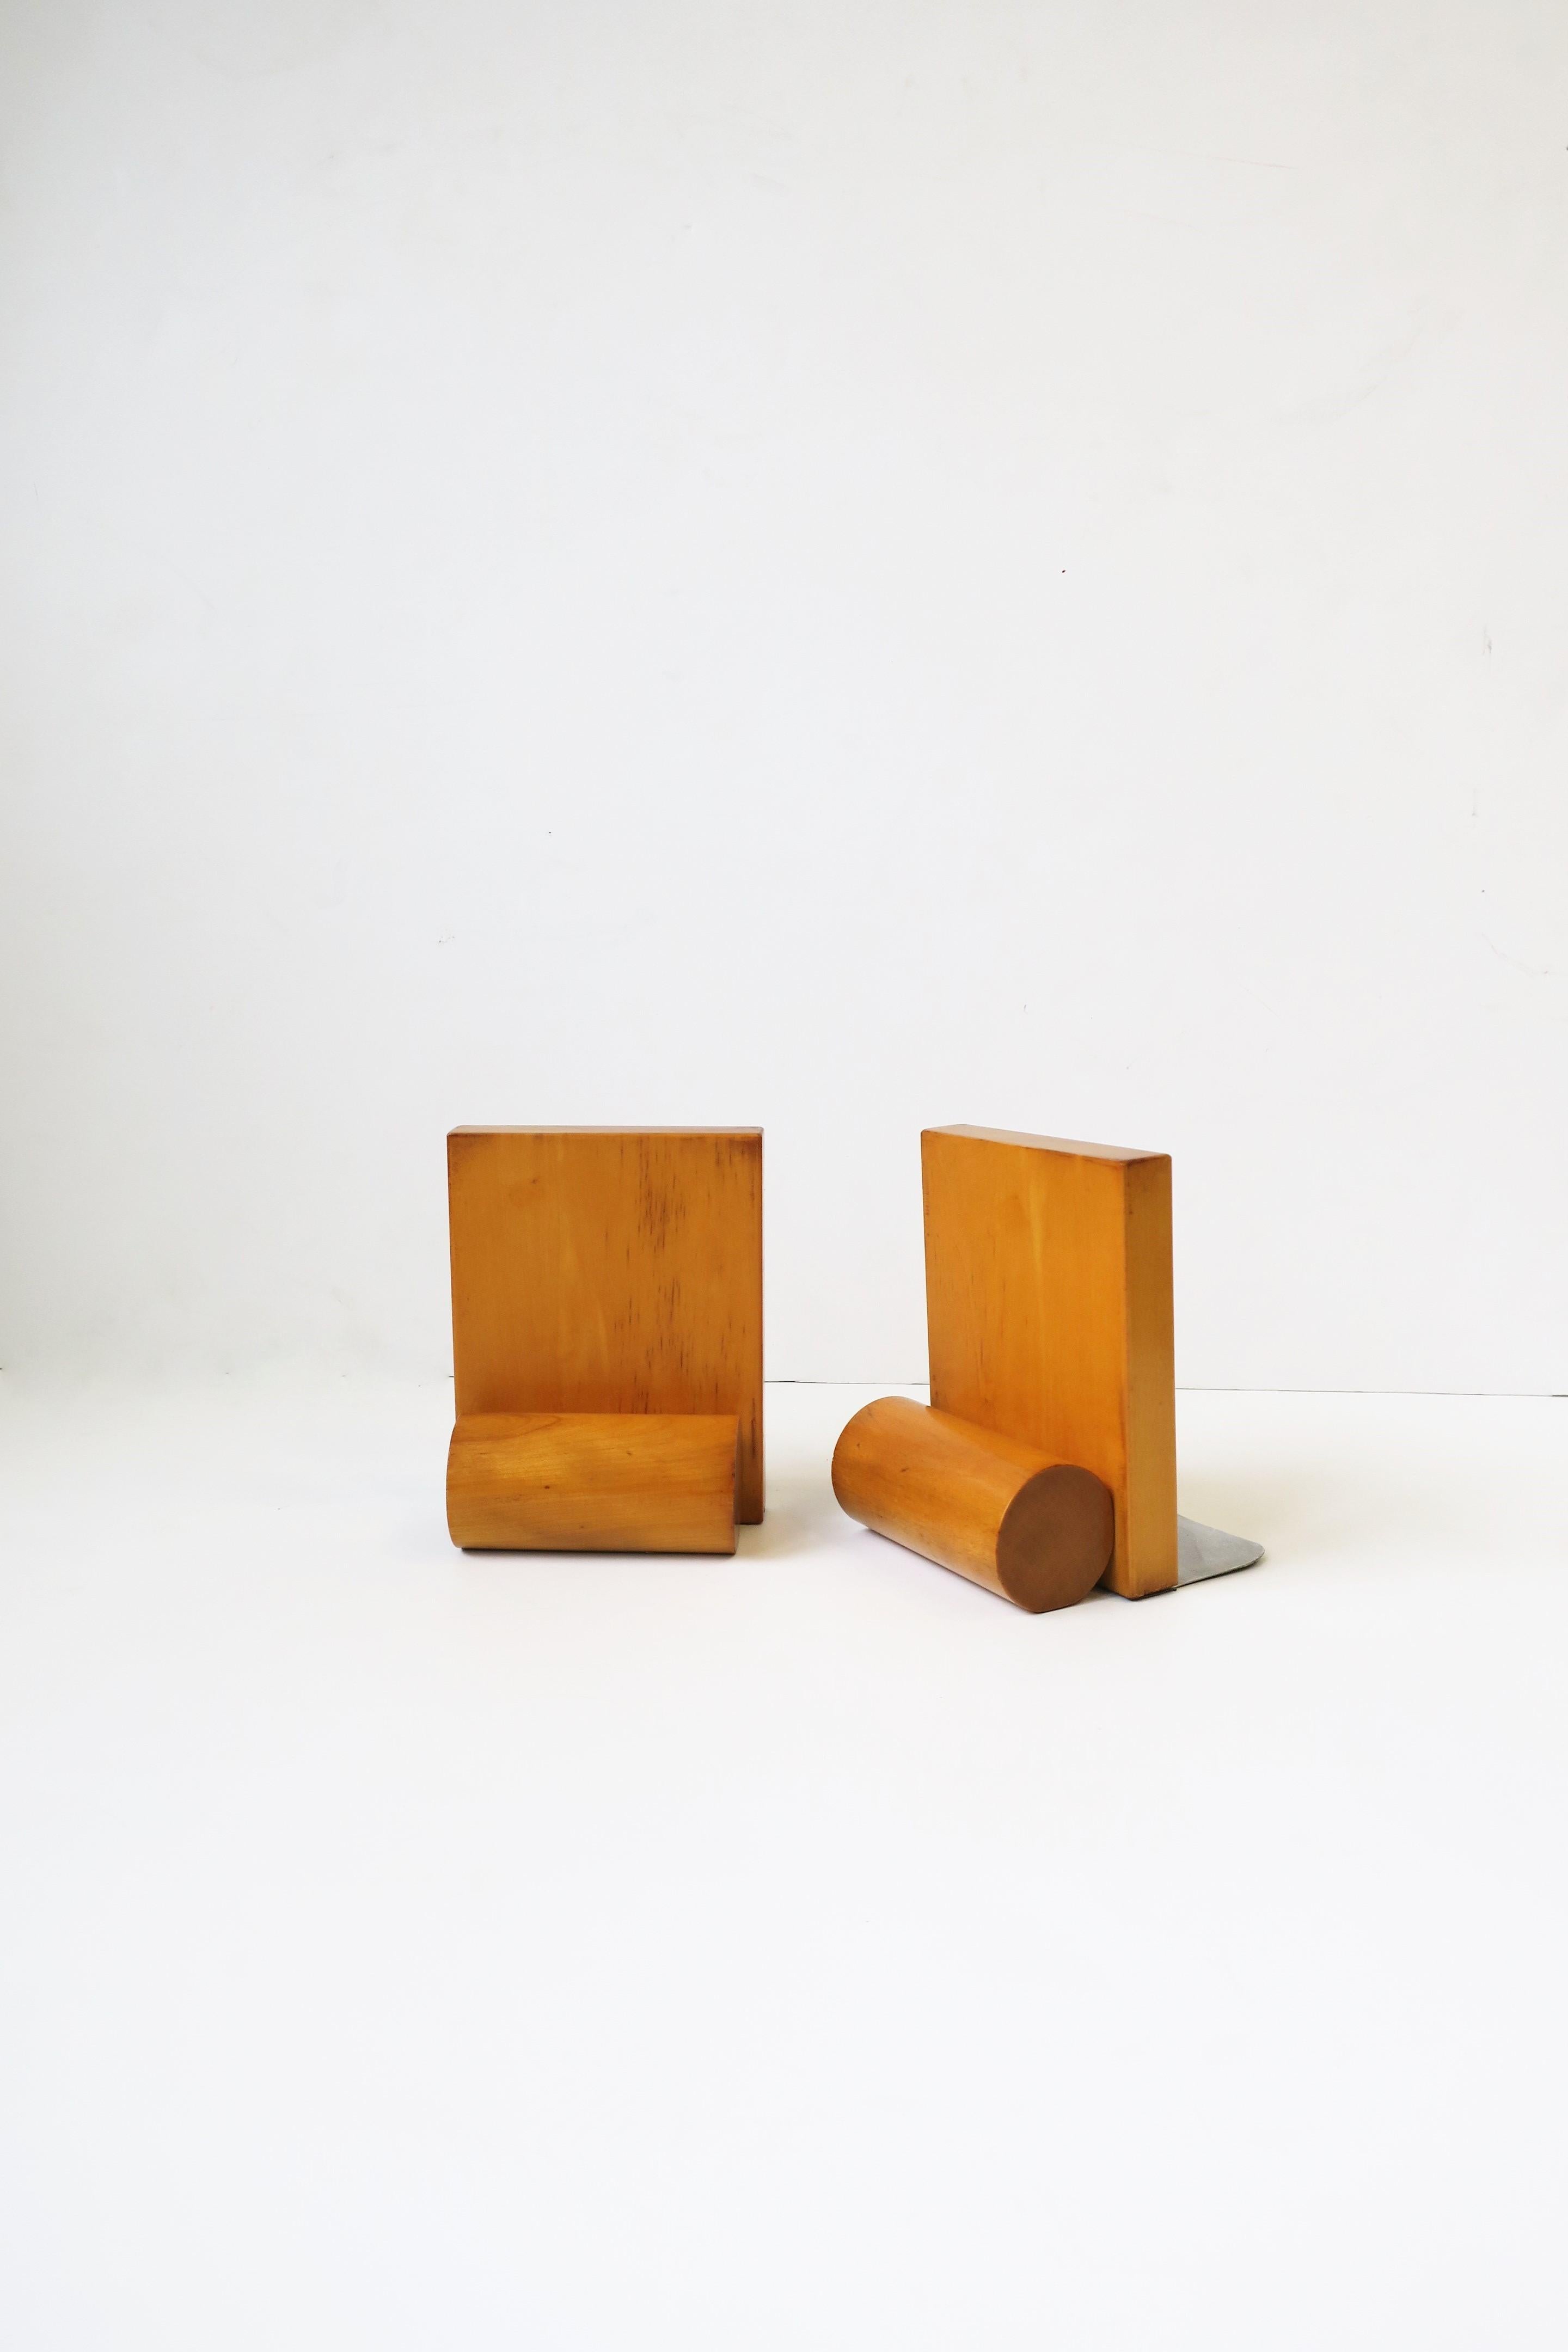 American Art Deco Modern Bookends, Pair For Sale